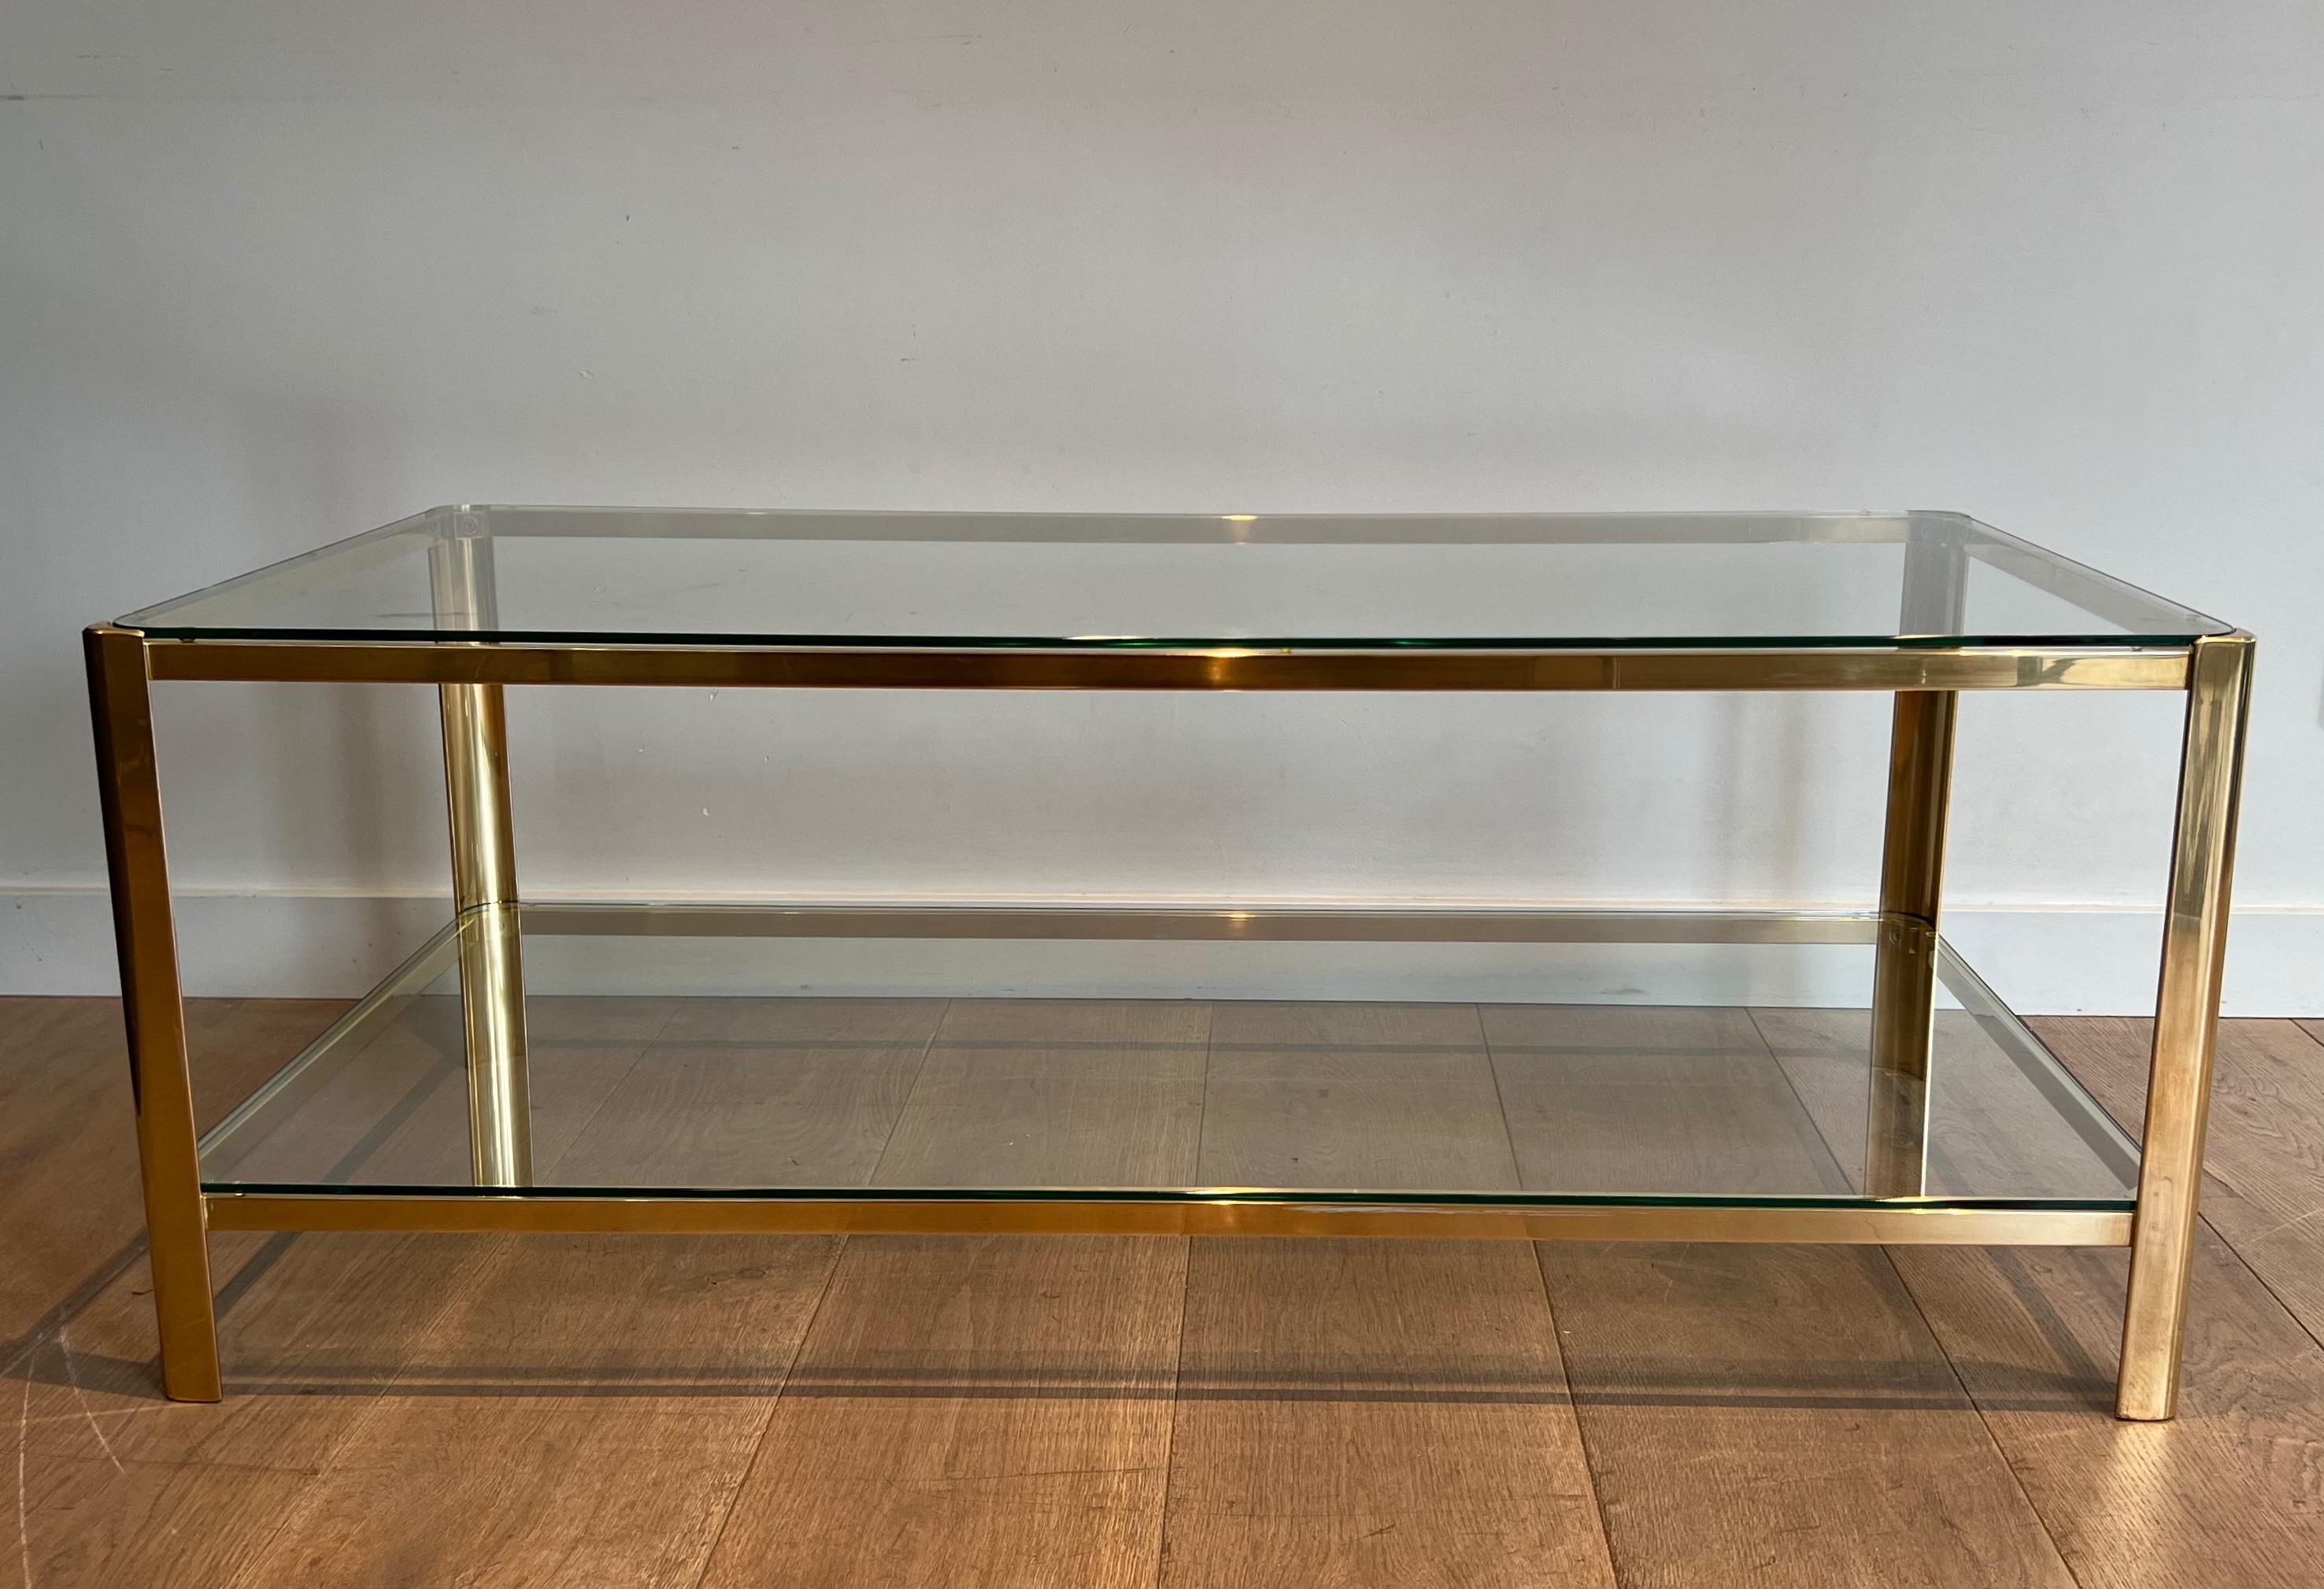 This beautiful two tiers coffee table is made of bronze with glass shelves rounded on corners. This is a very fine work signed Jacques Théophile Lepelletier and stamped by Broncz. Circa 1970.